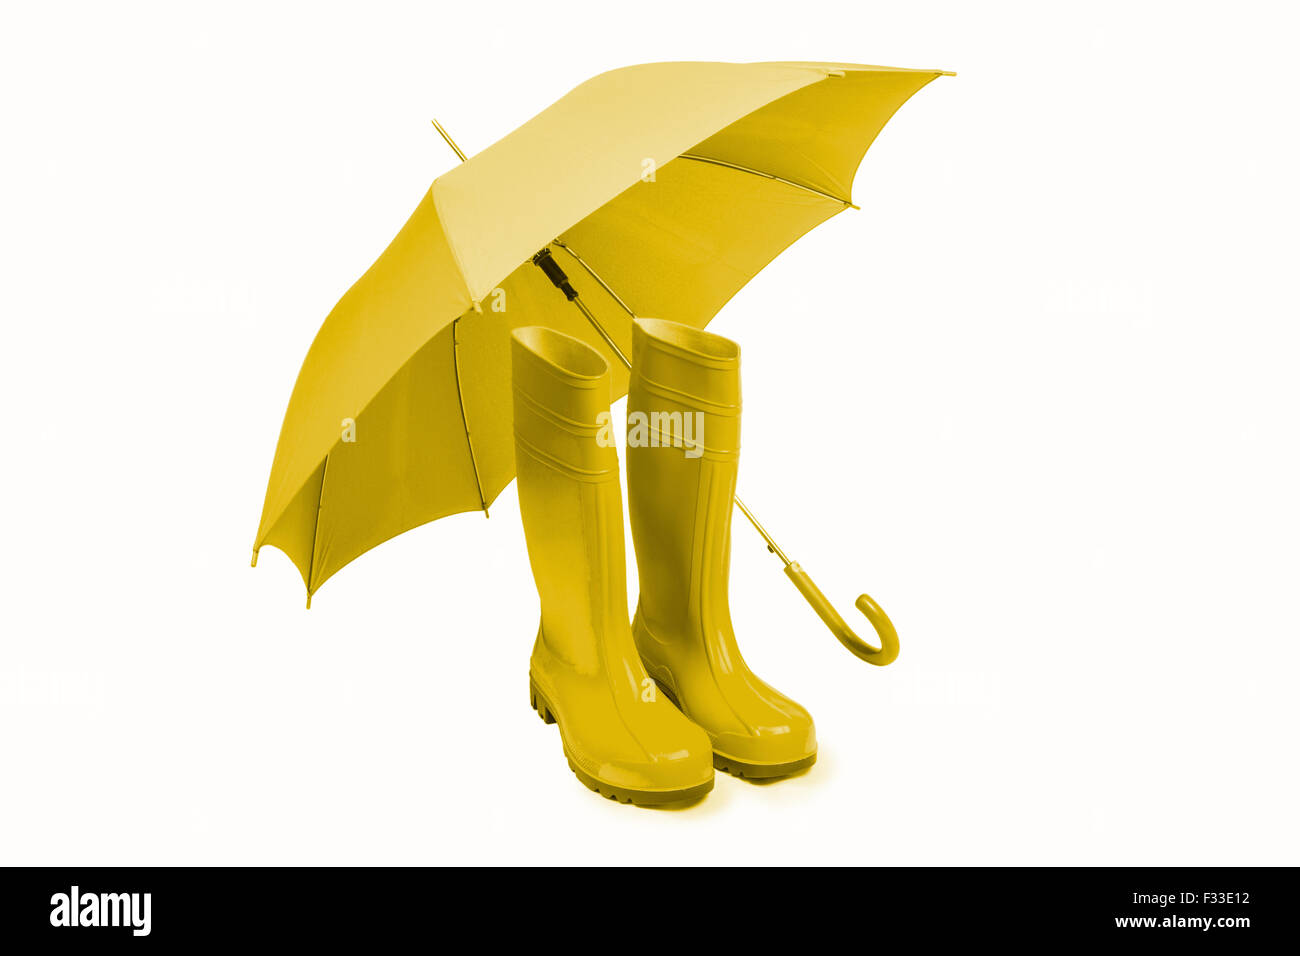 Rubber boots and umbrella isolated in yellow Stock Photo